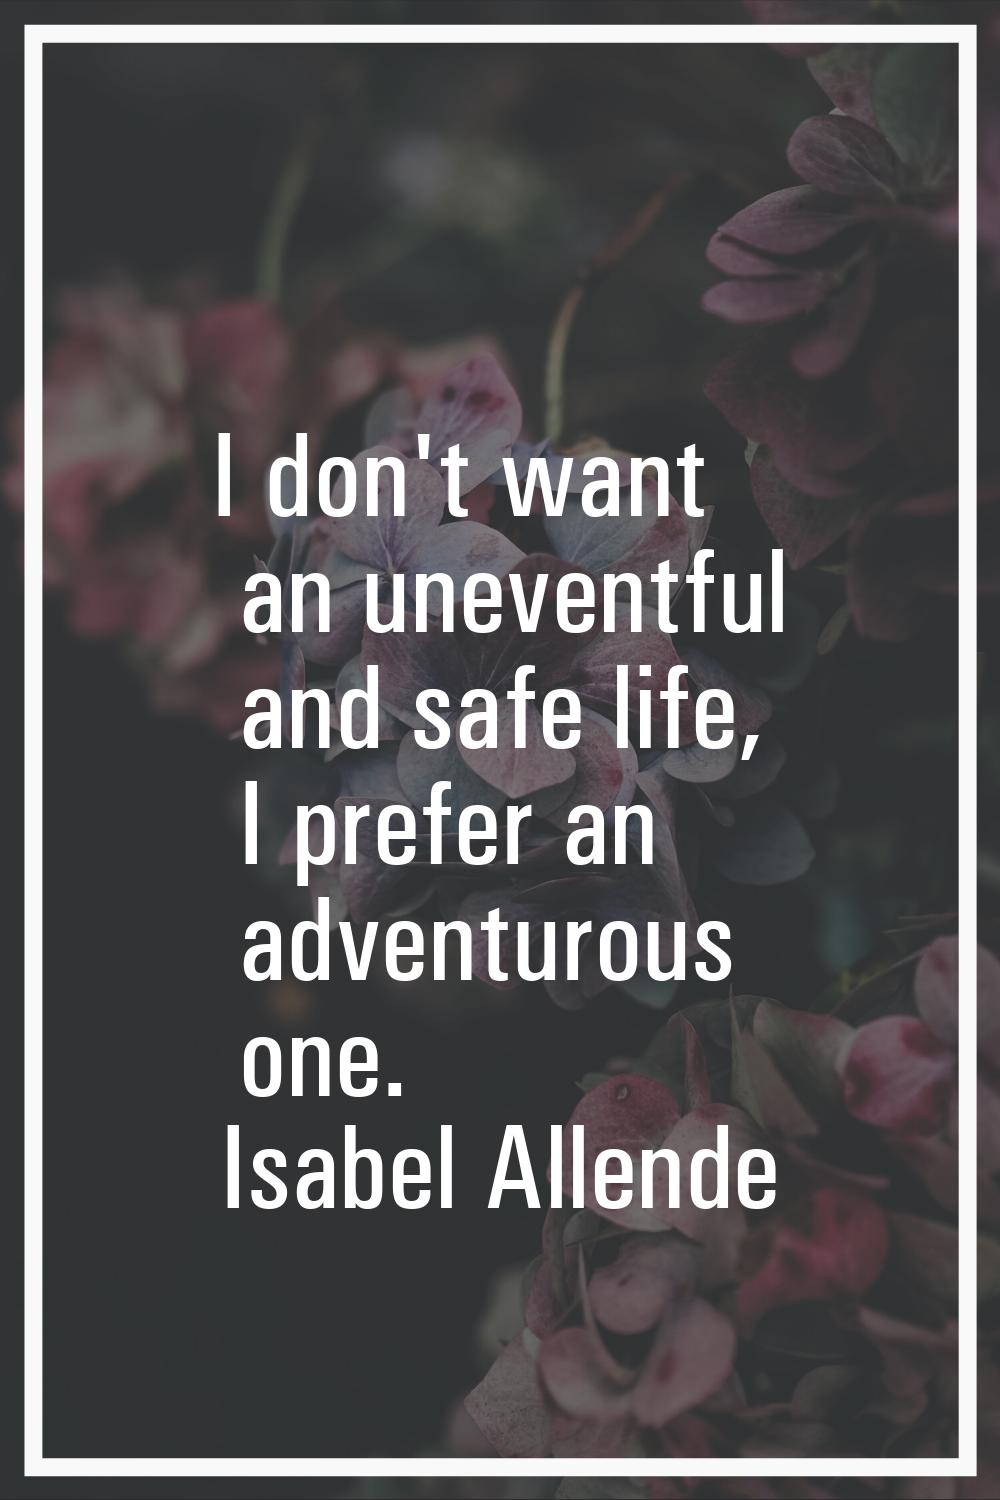 I don't want an uneventful and safe life, I prefer an adventurous one.